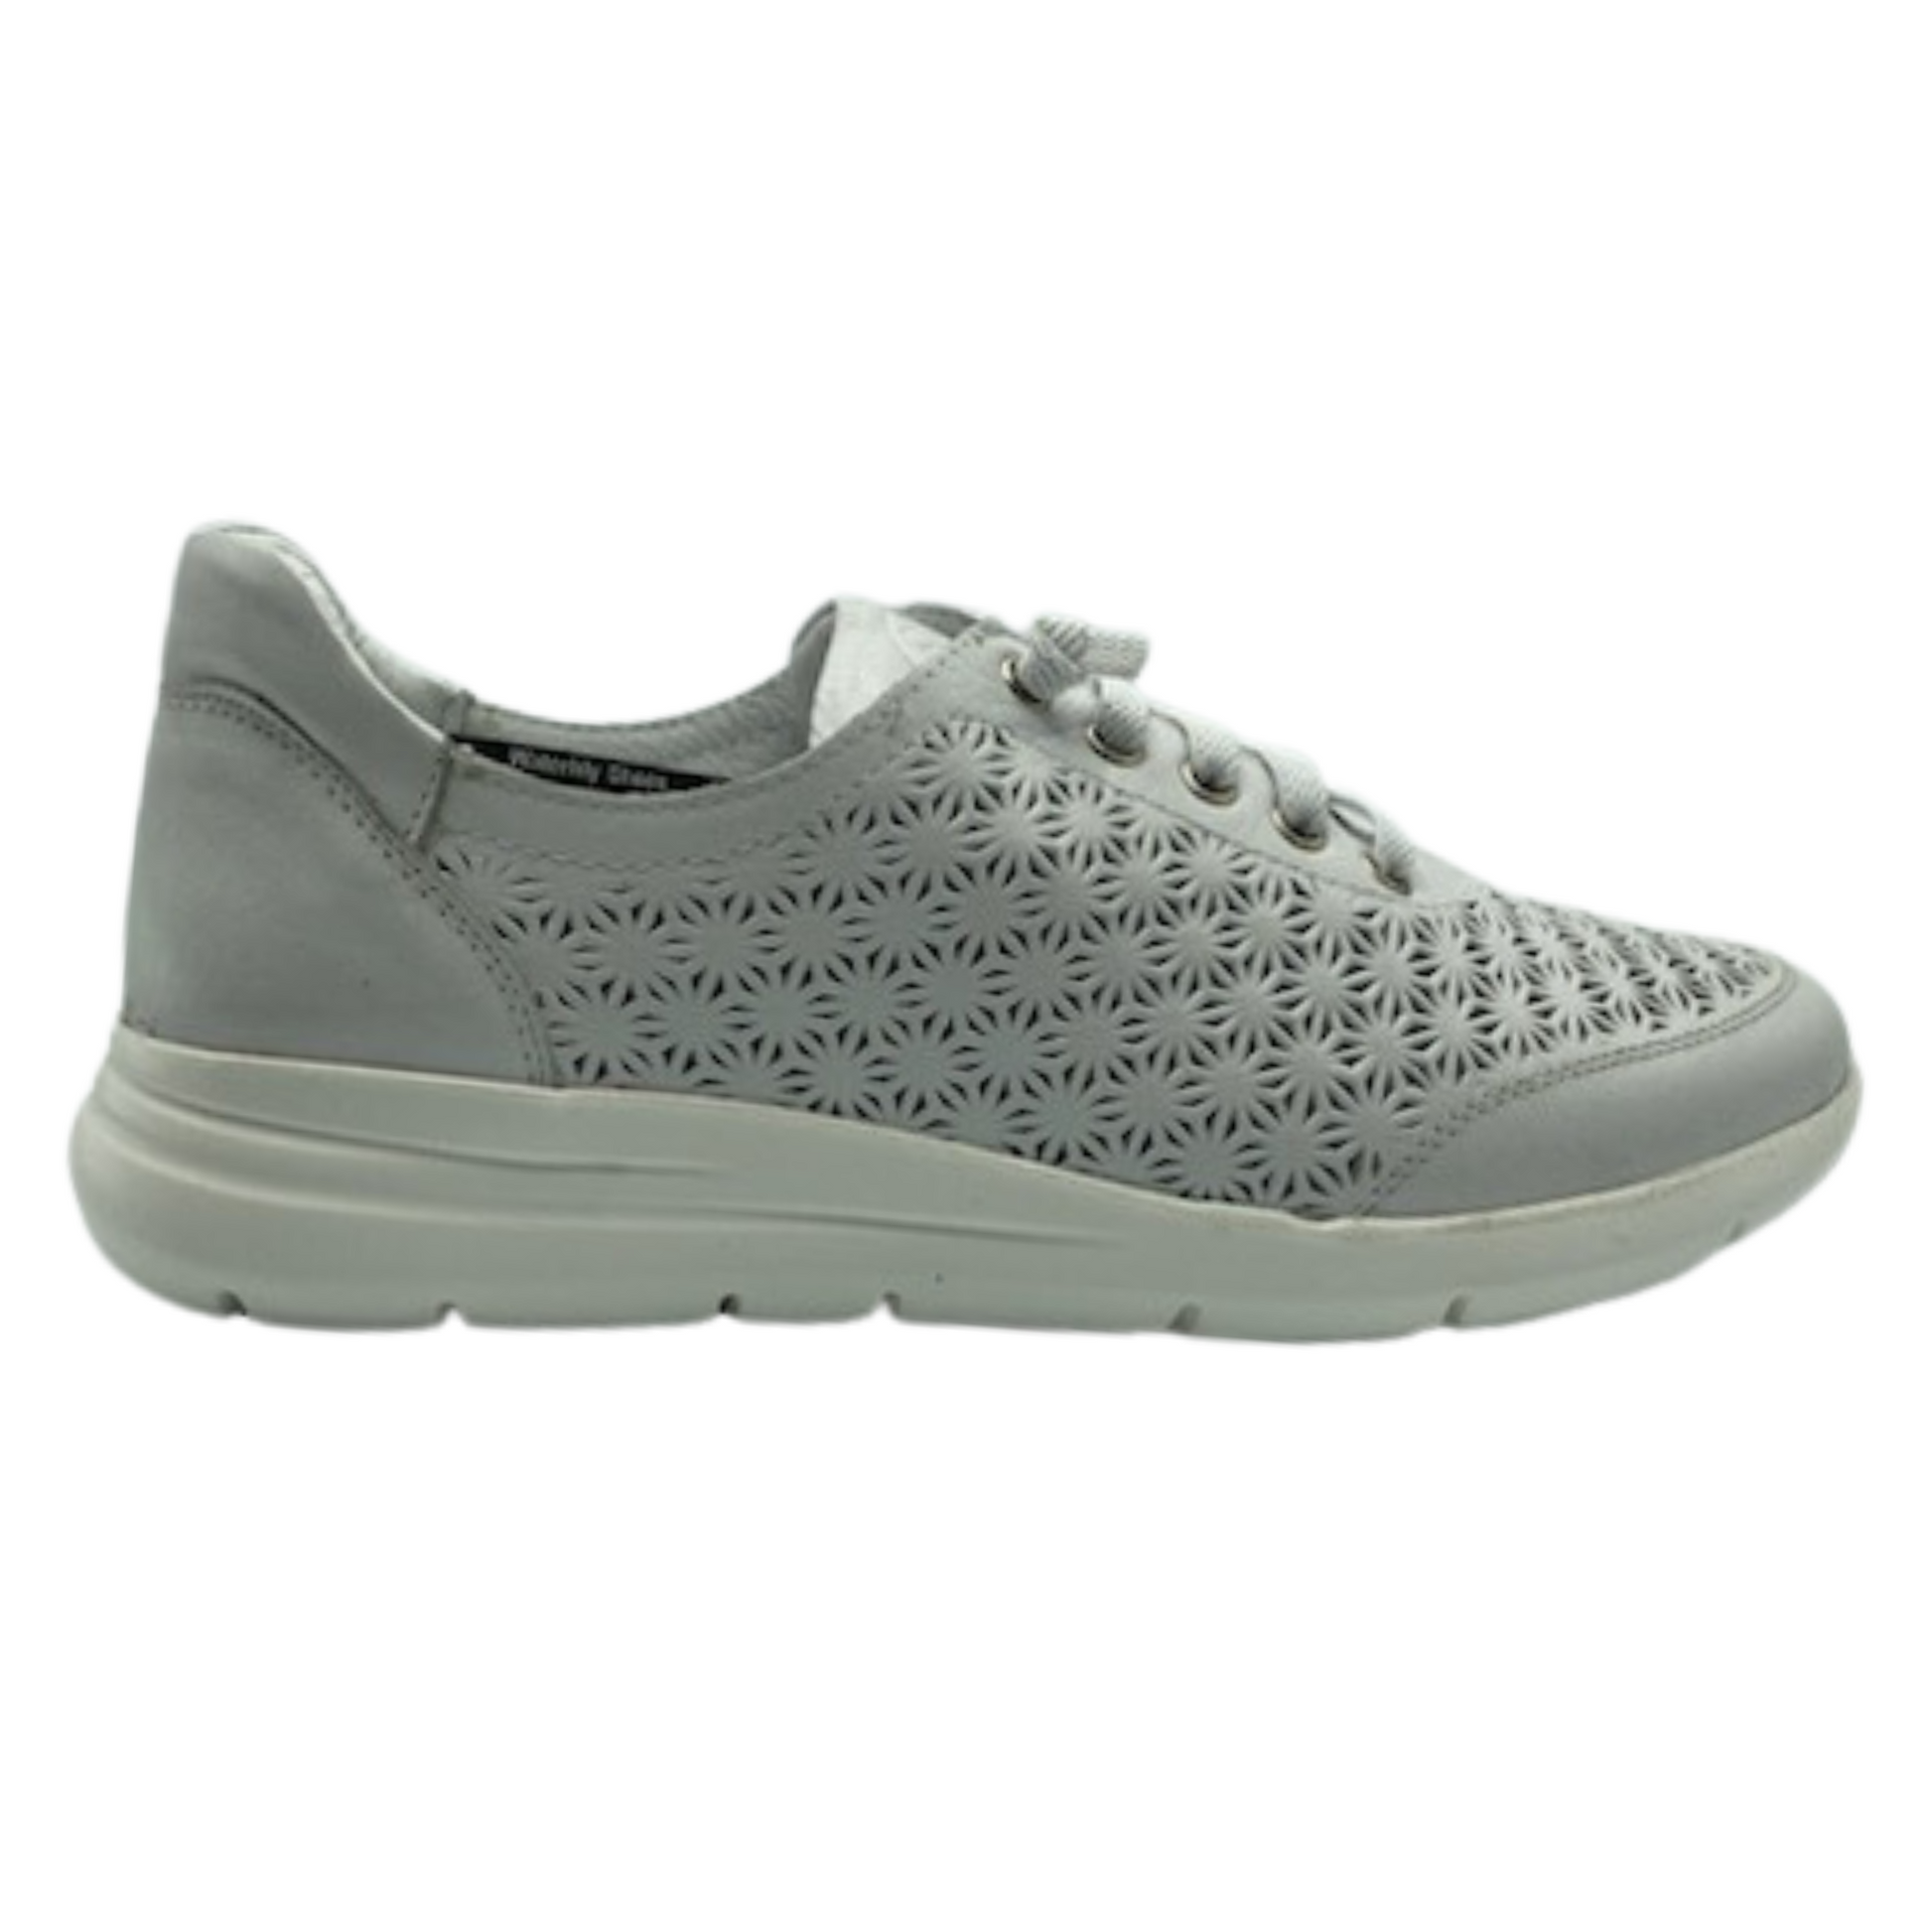 Side view of white leather sneaker with perforated design